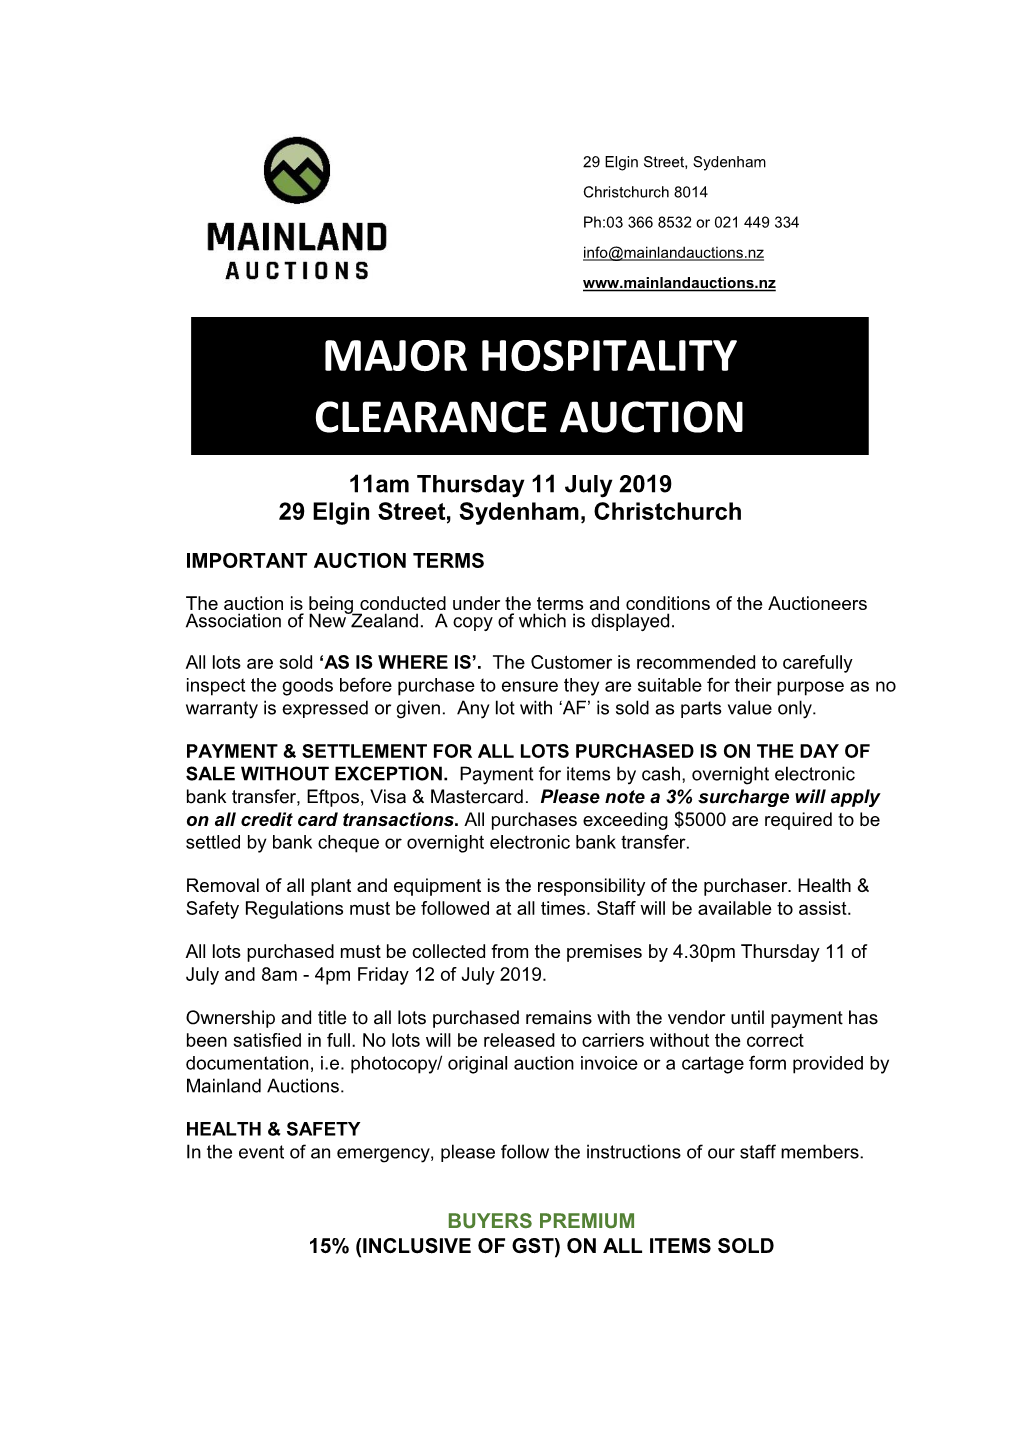 Major Hospitality Clearance Auction GST Inclusive Thursday, 11 July 2019Folio No.: 0068 Lot No Guide Qty Lot No Guide Qty 1 Portable Insulated Coolroom Foodcart/Kiosk